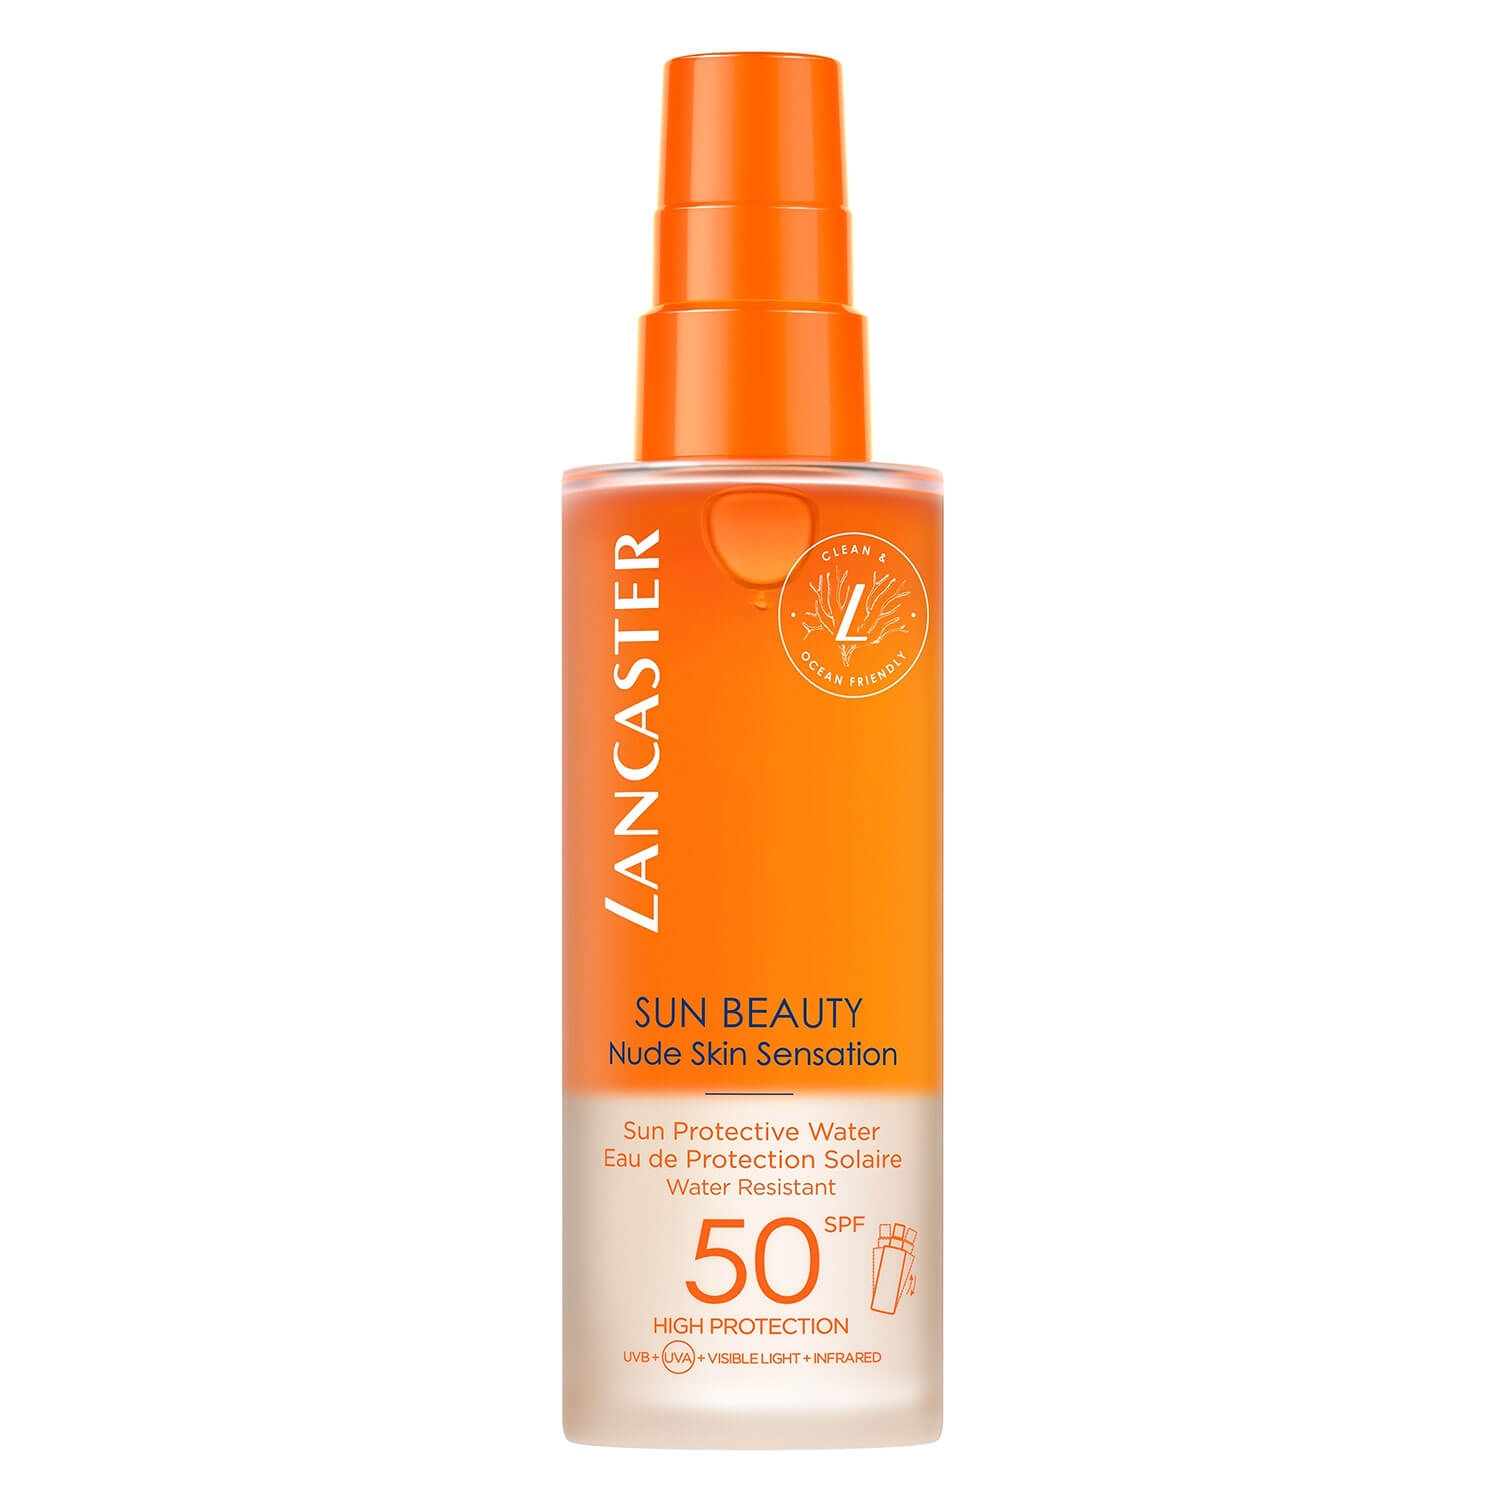 Product image from Sun Beauty - Nude Skin Sensation Sun Protection Water SPF50